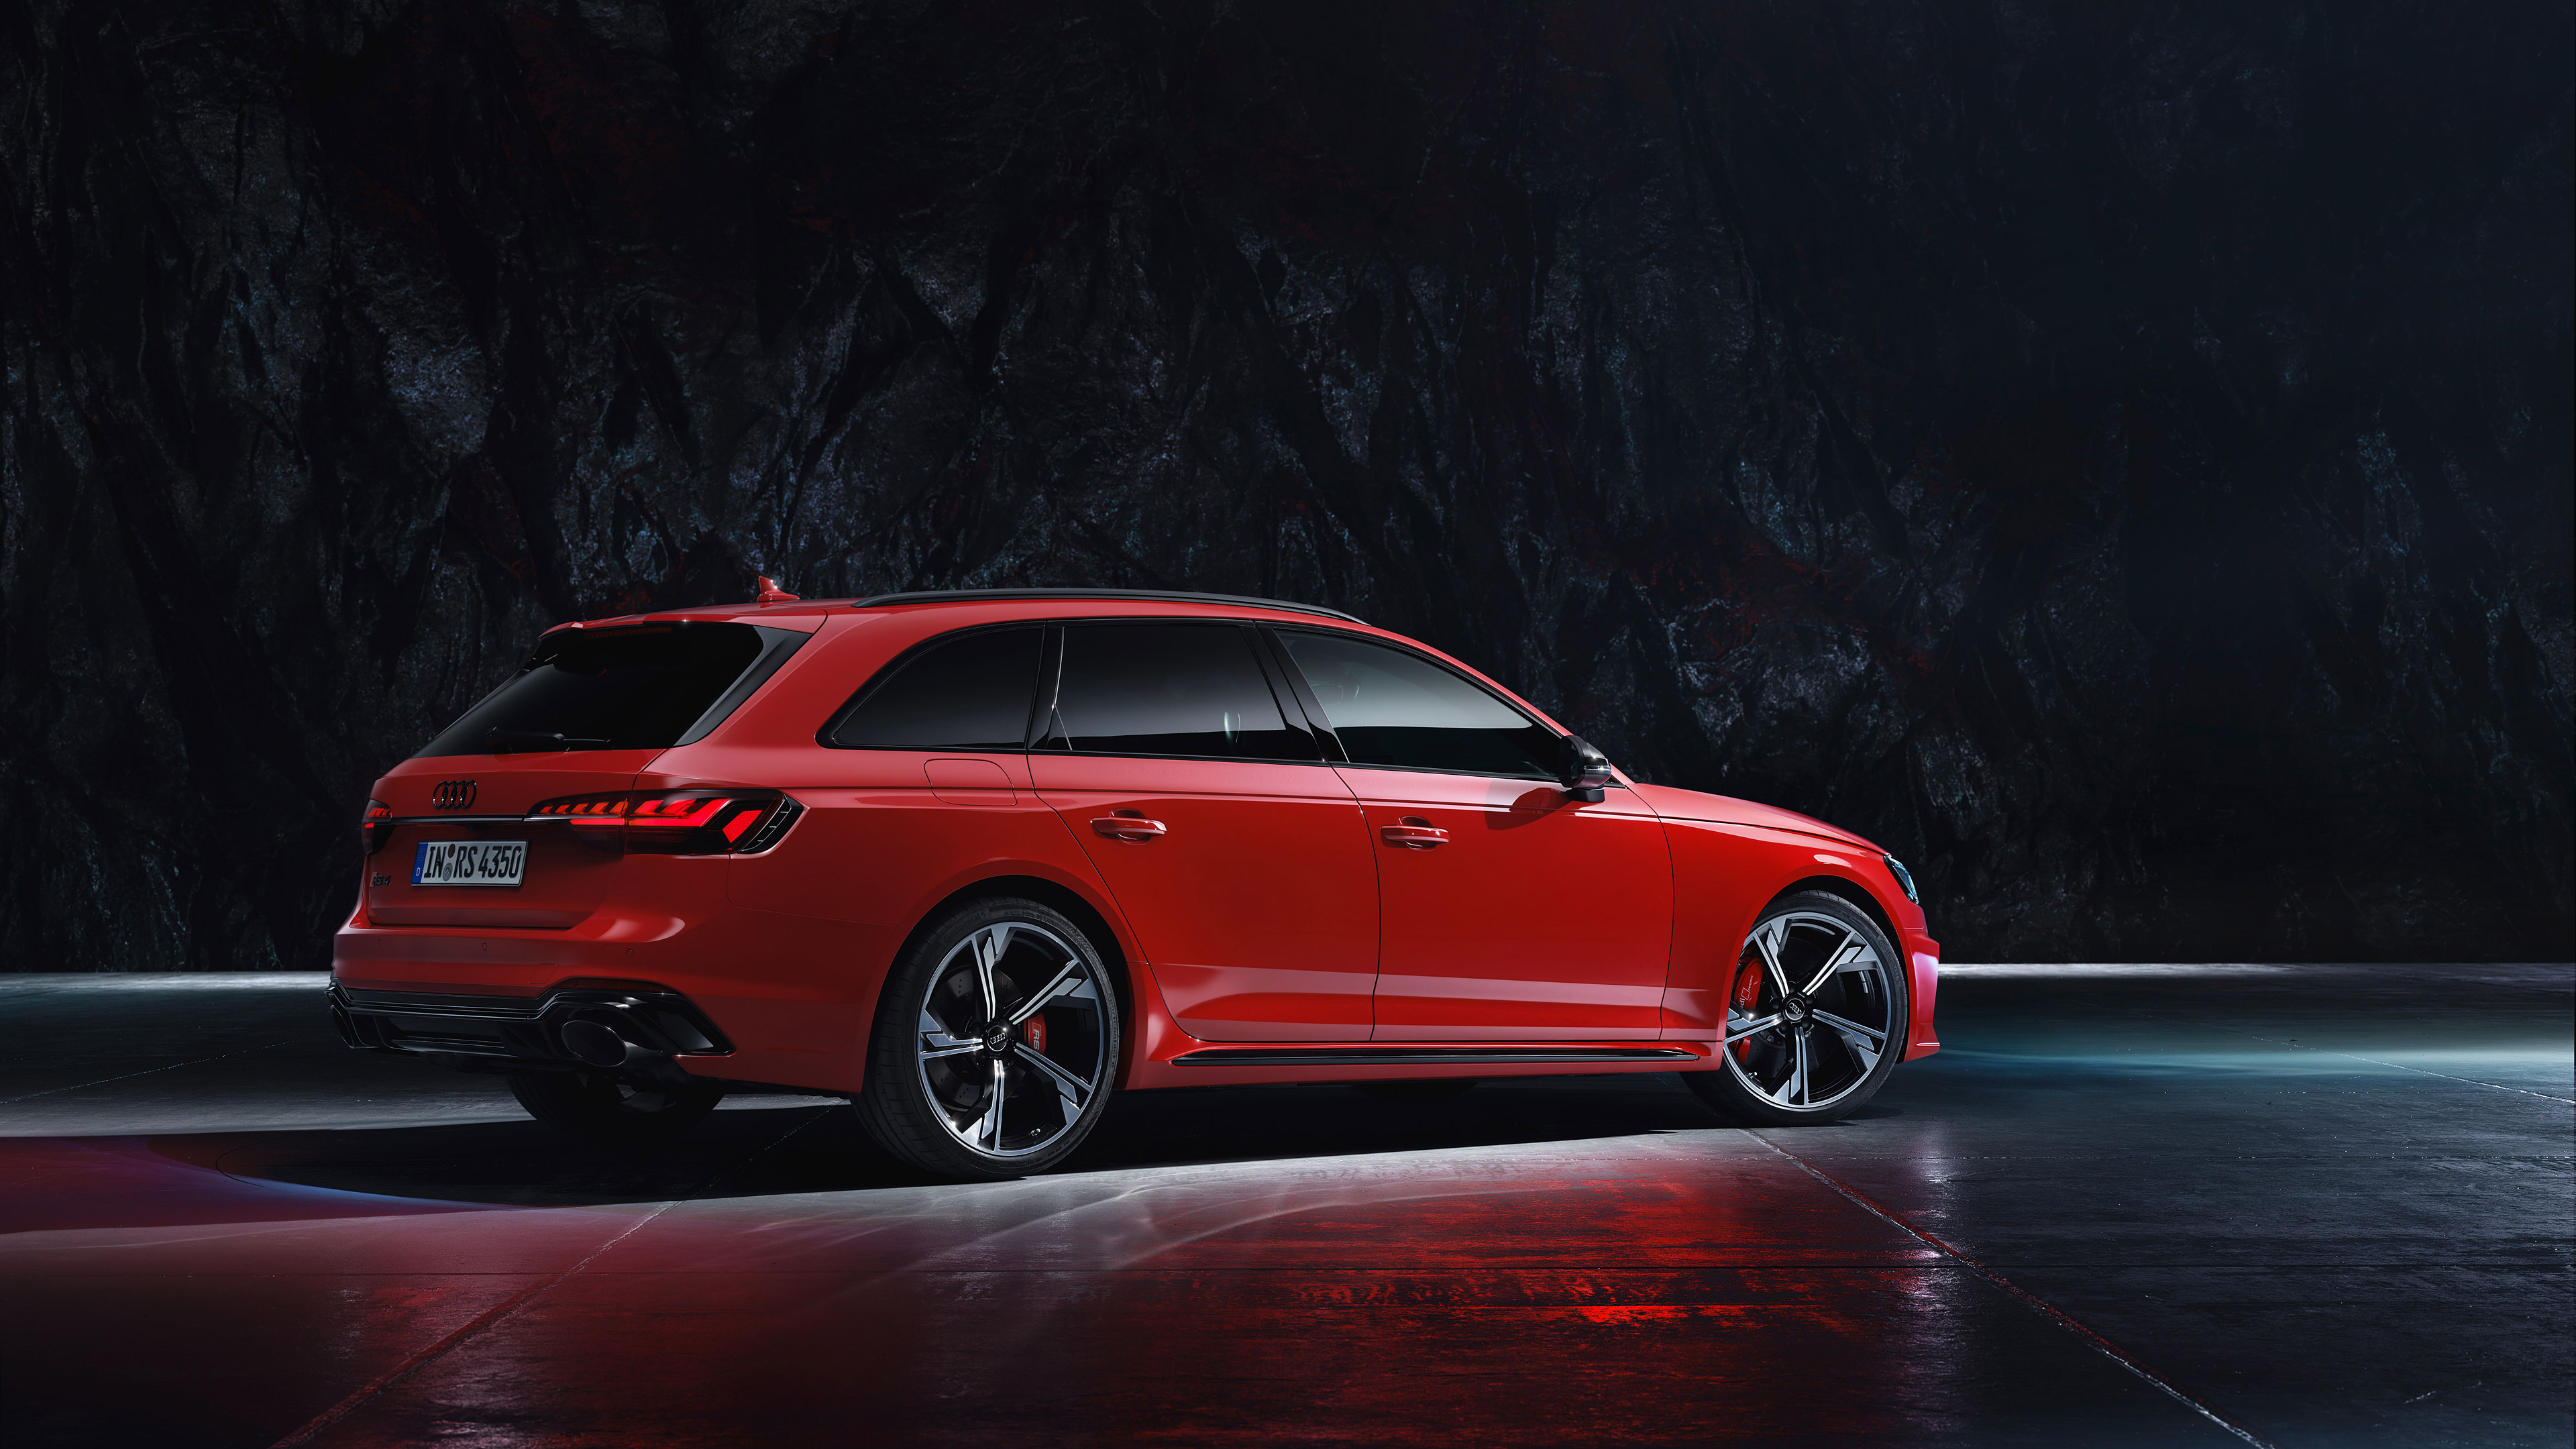 General 3840x2160 Audi RS4 Avant Audi RS4 car vehicle spotlights red cars numbers station wagon German cars Volkswagen Group